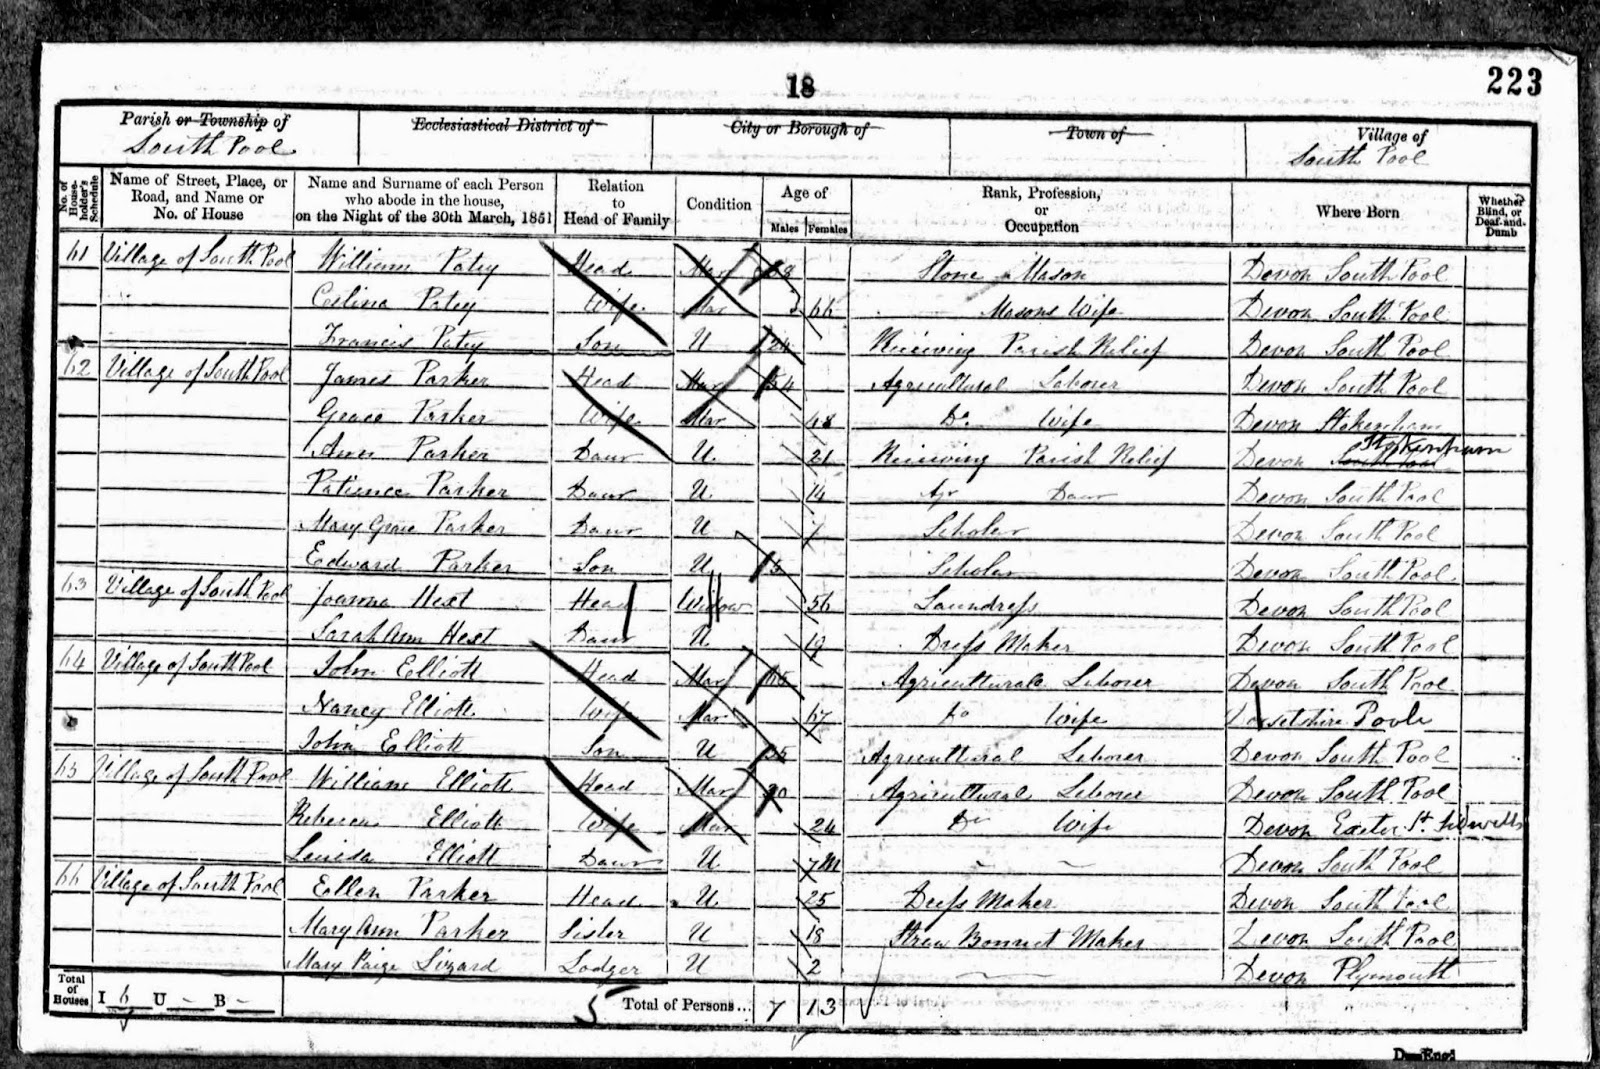 South Pool in 1851 census